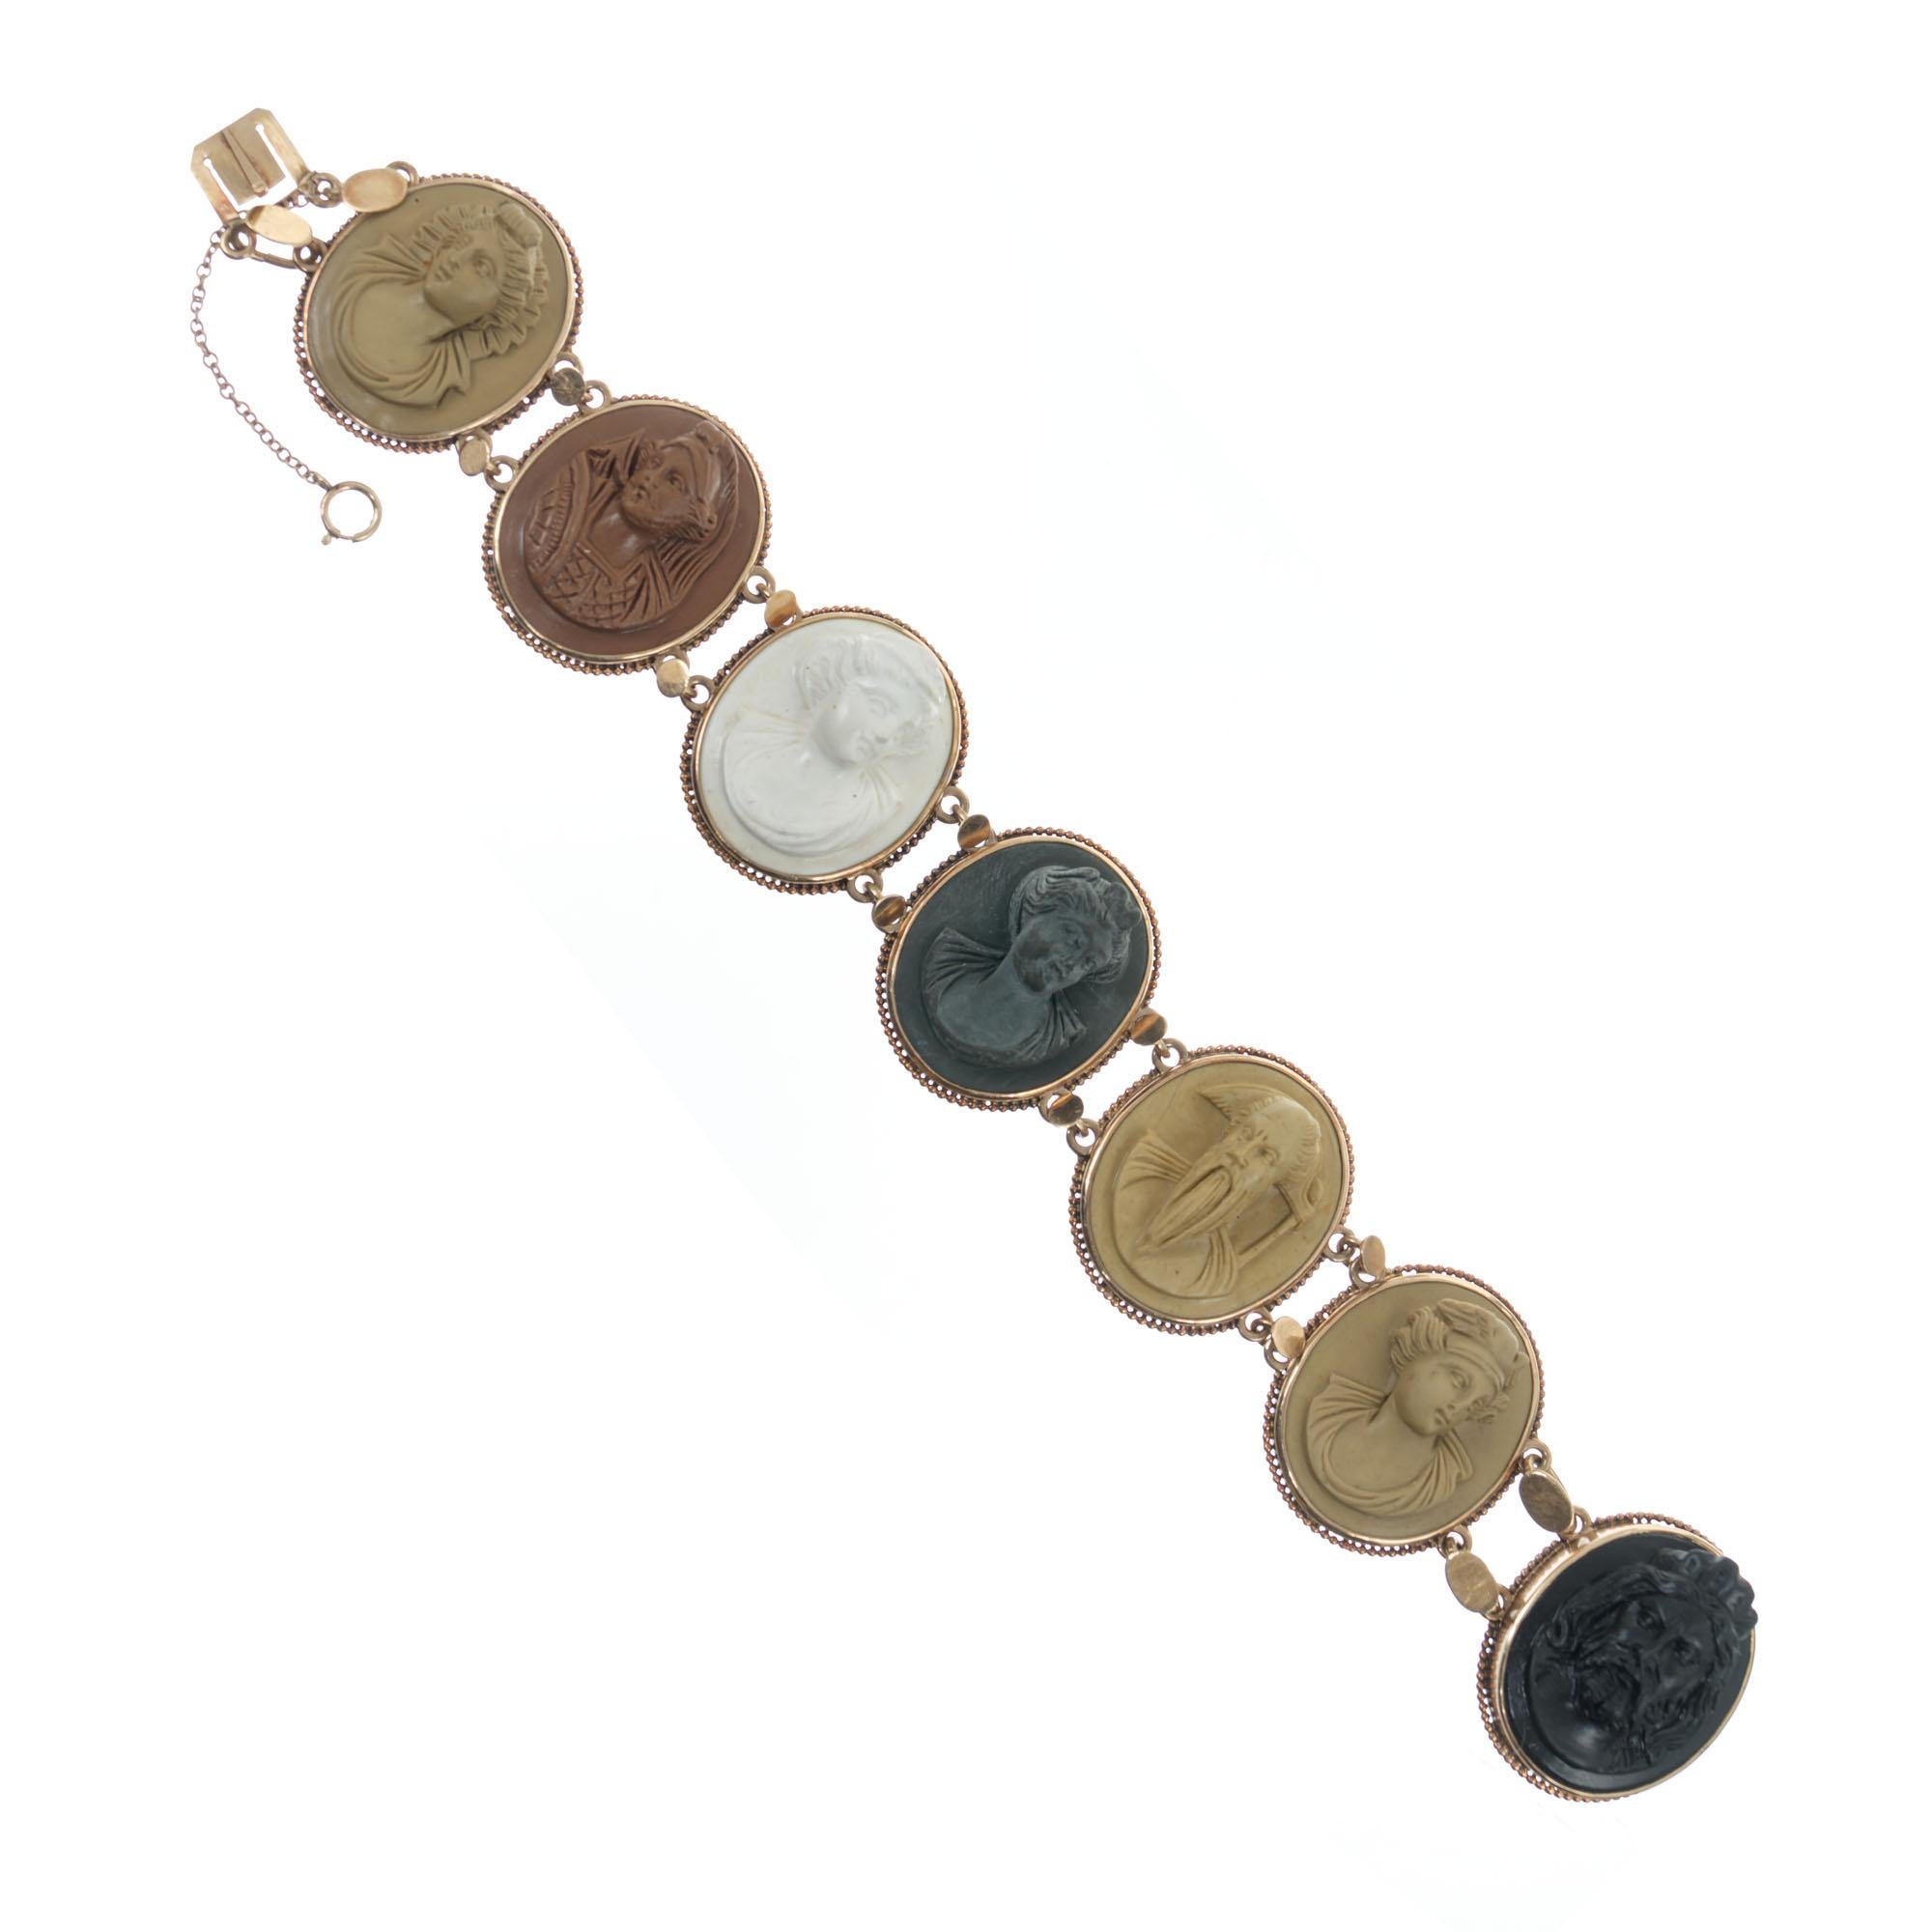 Handmade 14k rose gold Cameo bracelet.  Circa 1890's with seven carved lava high relief cameos of different natural untreated colors. 8 inches in length. 

7 oval high relief multi color lava carvings, 26mm x 22mm 
14k rose gold 
Stamped:  Not
51.1